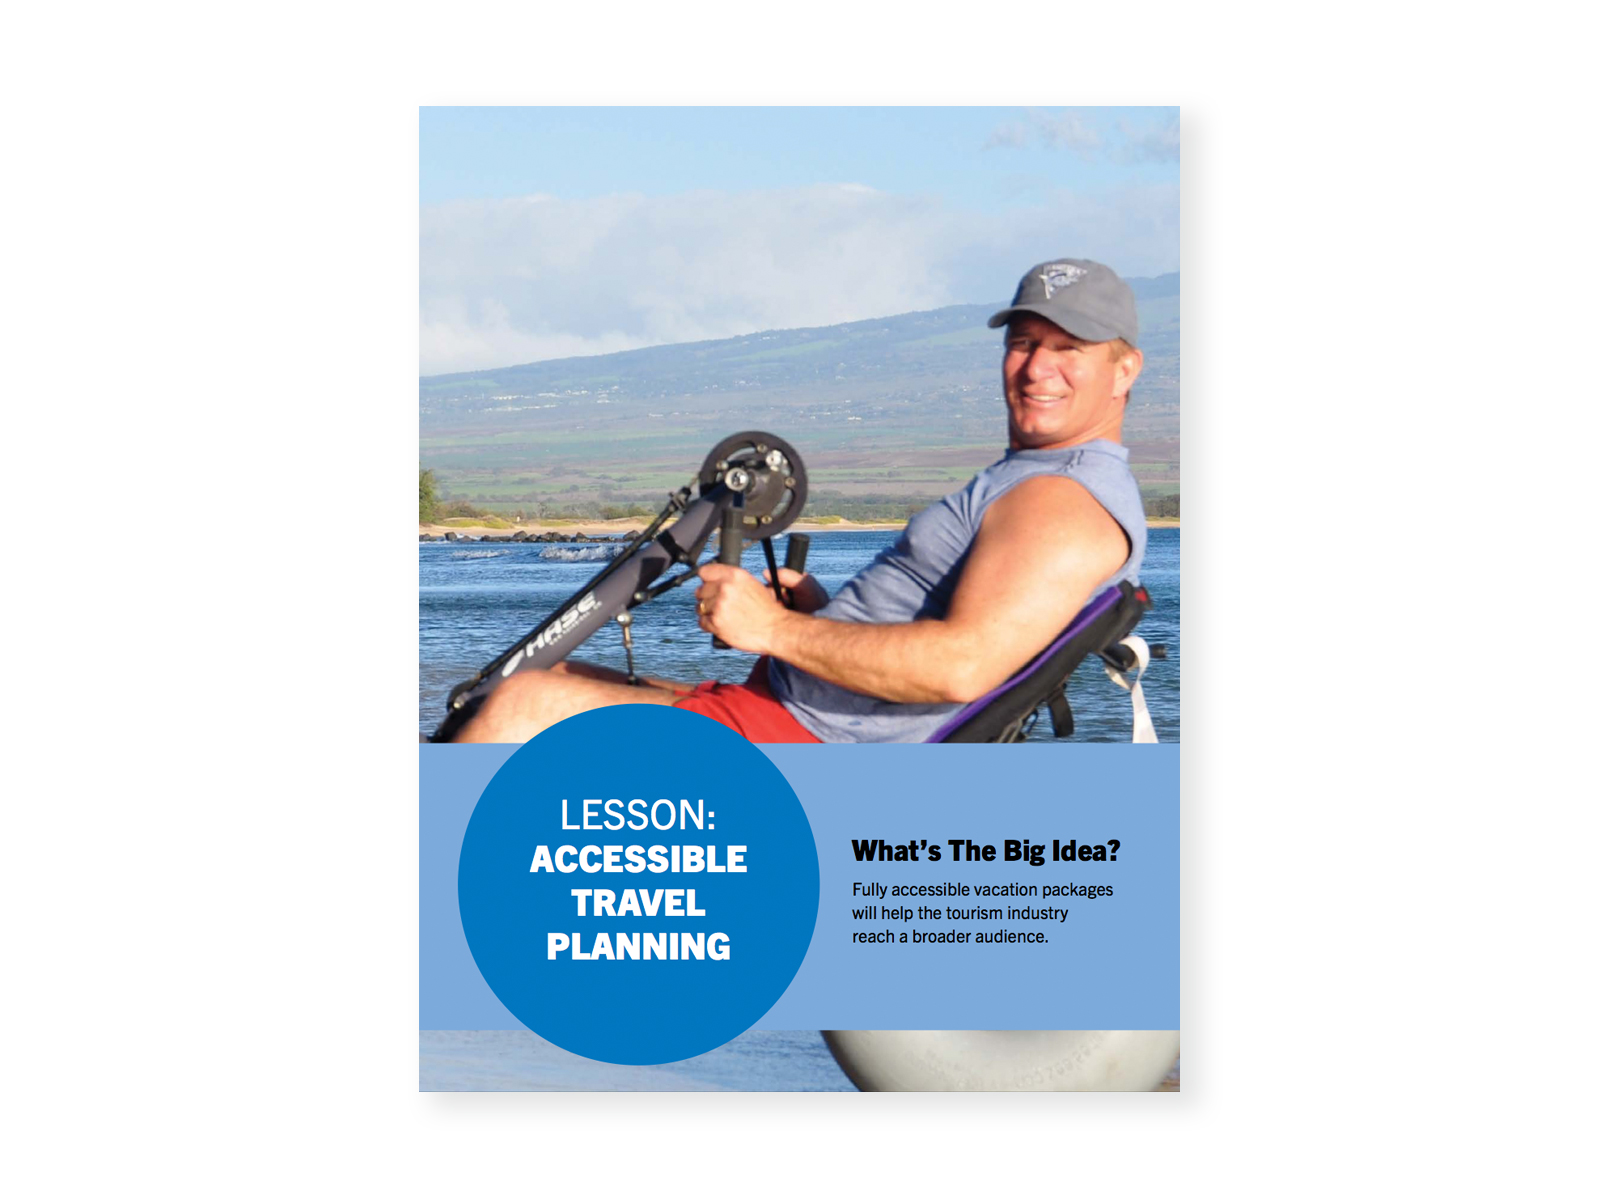 Rick Hansen using a beach wheelchair, posing in front of a lake and mountain. Cover for "Accessible Travel Planning" lesson.